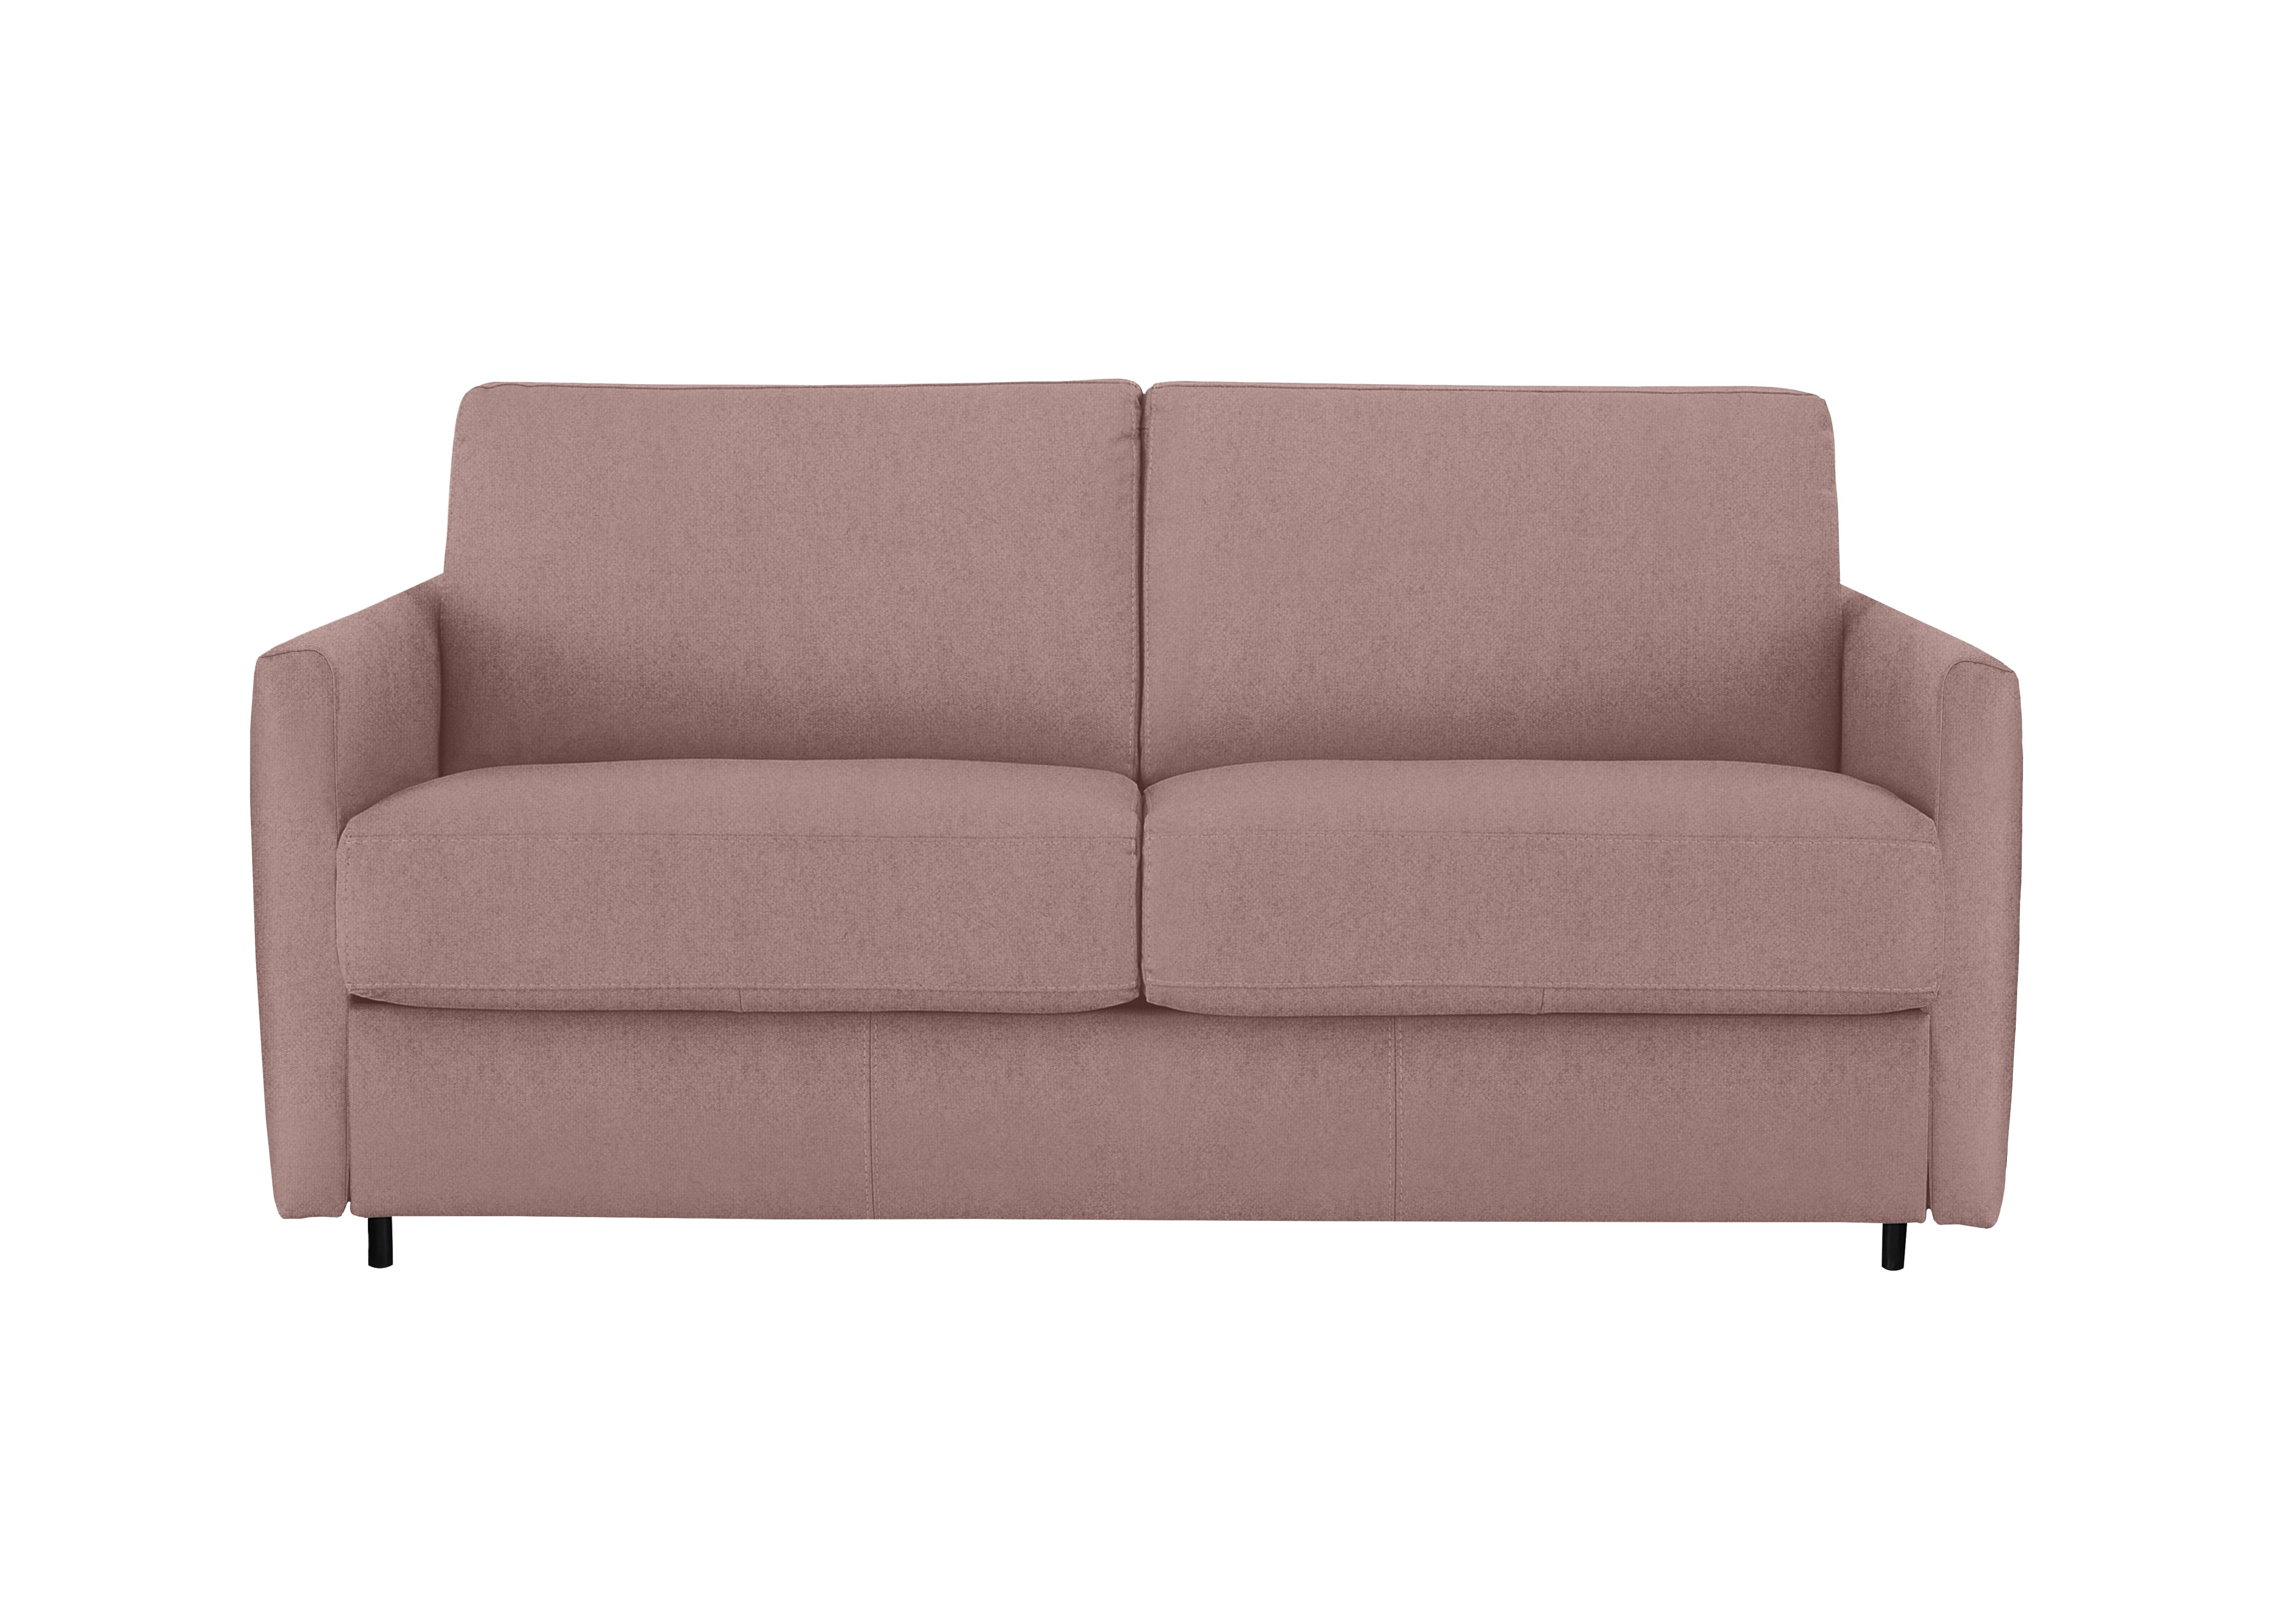 Alcova 2.5 Seater Fabric Sofa Bed with Slim Arms in Fuente Coral on Furniture Village